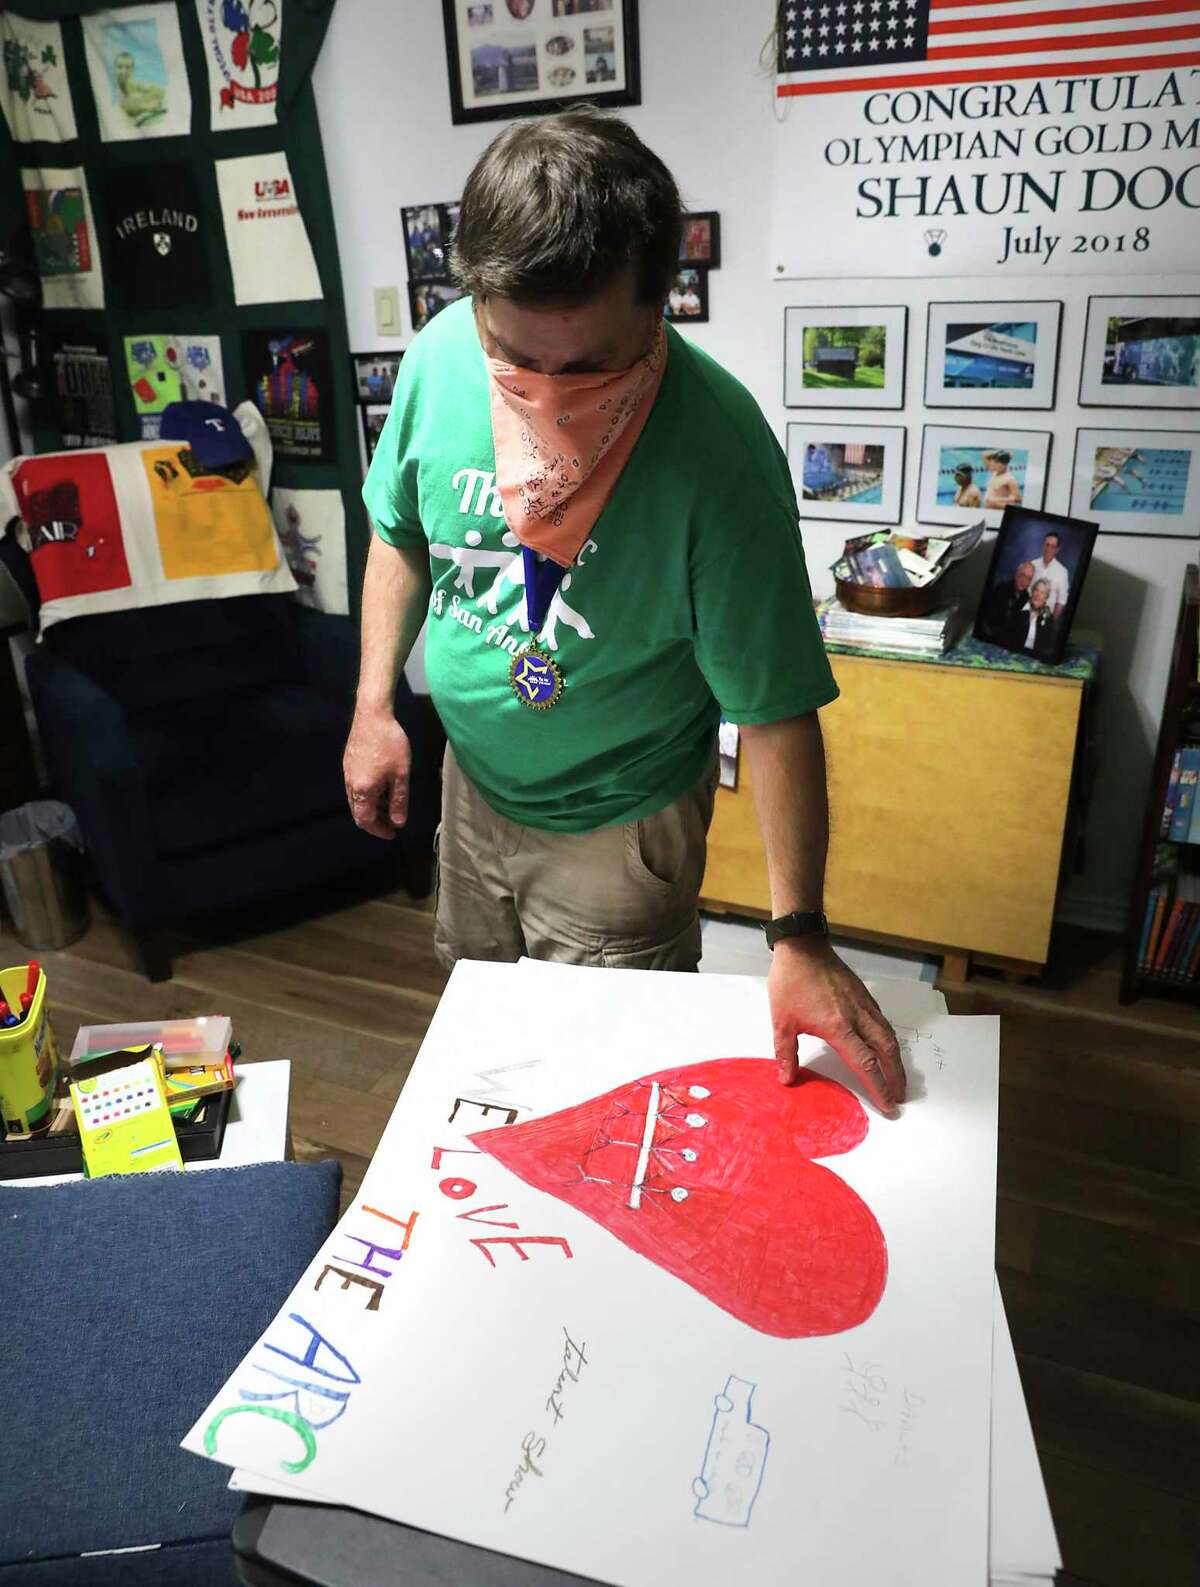 Shaun Dooley, a participant in the ARC's Adult Life Enrichment program, has found great satisfaction and meaningful relationships at the ARC, on Friday, May 22, 2020. He is making a poster to give to friends at the ARC.